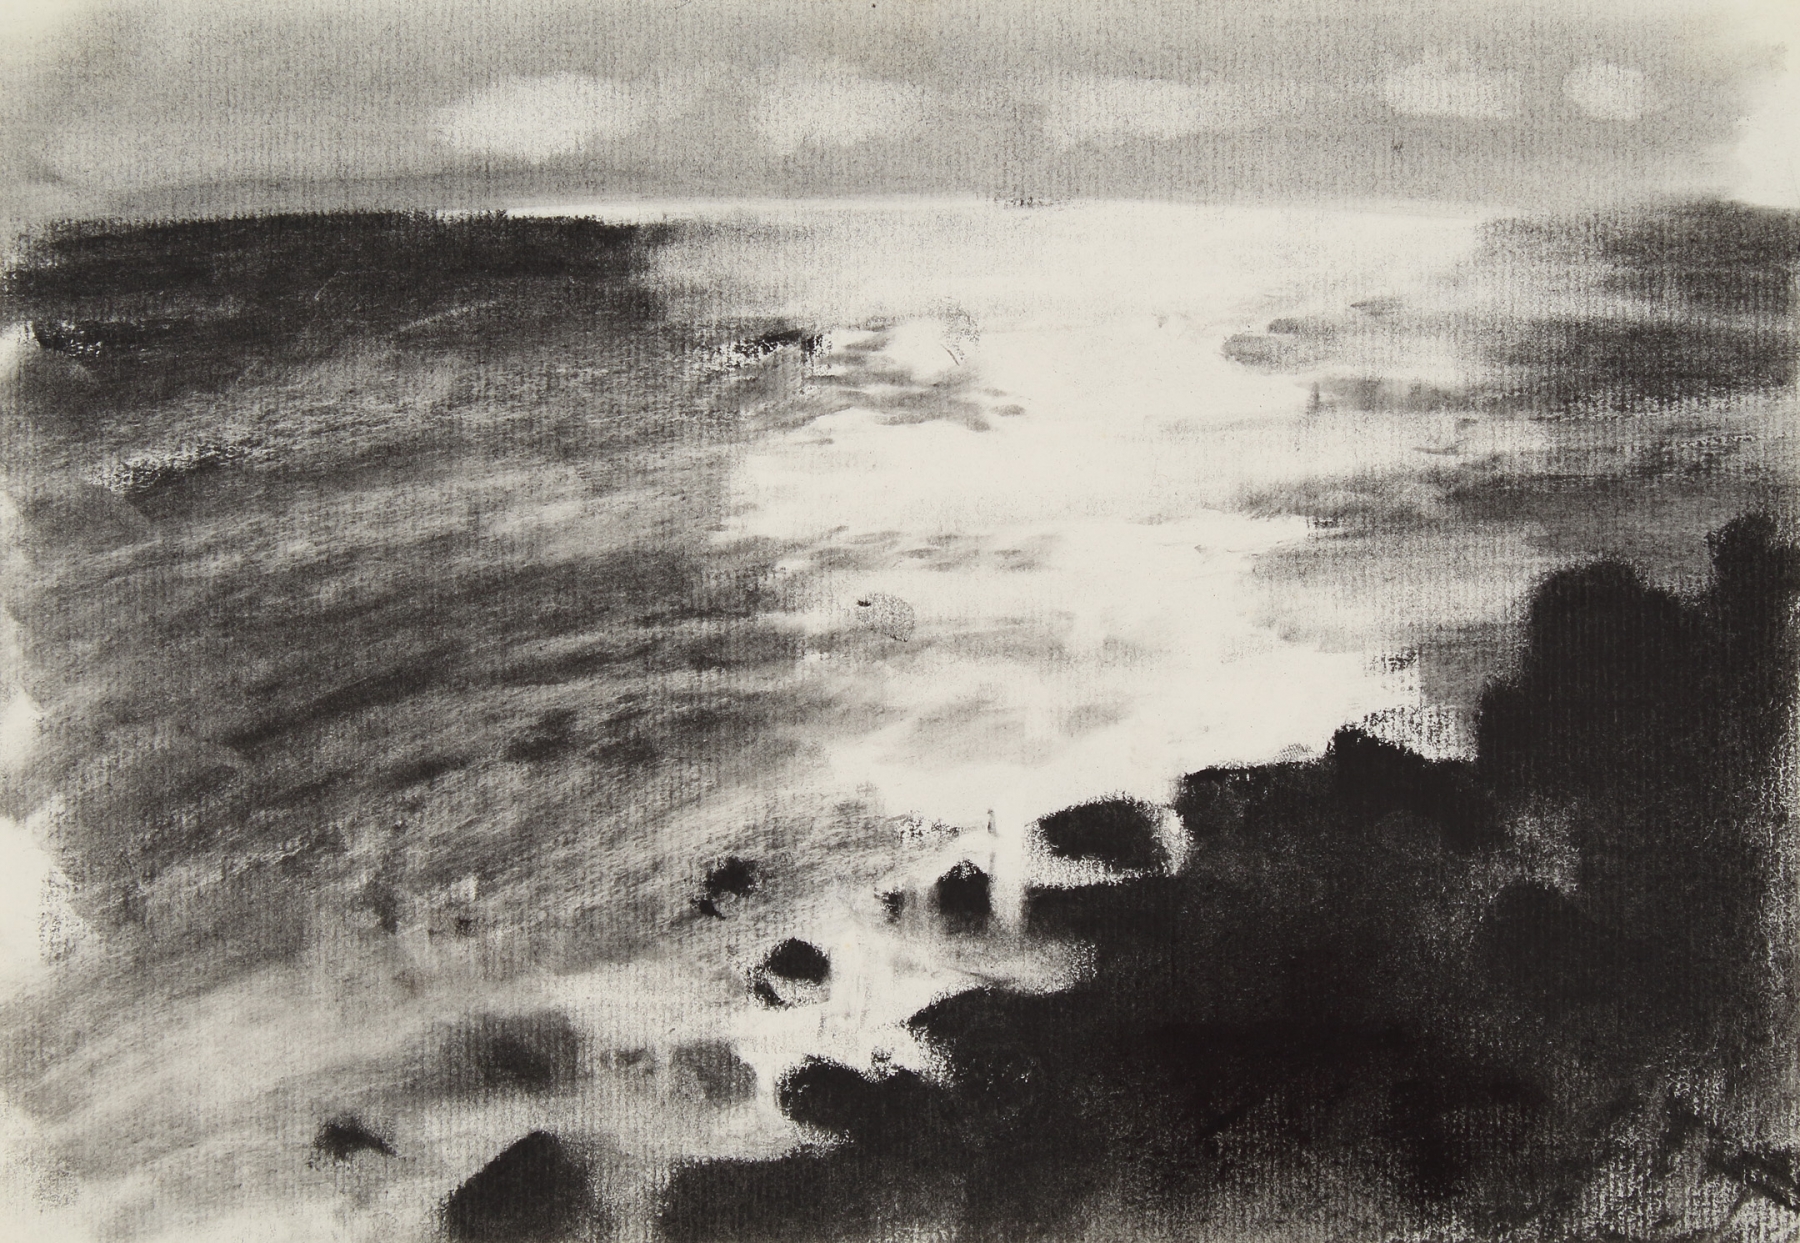 The Back Shore: November, 1977, charcoal on paper, 7 1/4 x 10 1/2 inches